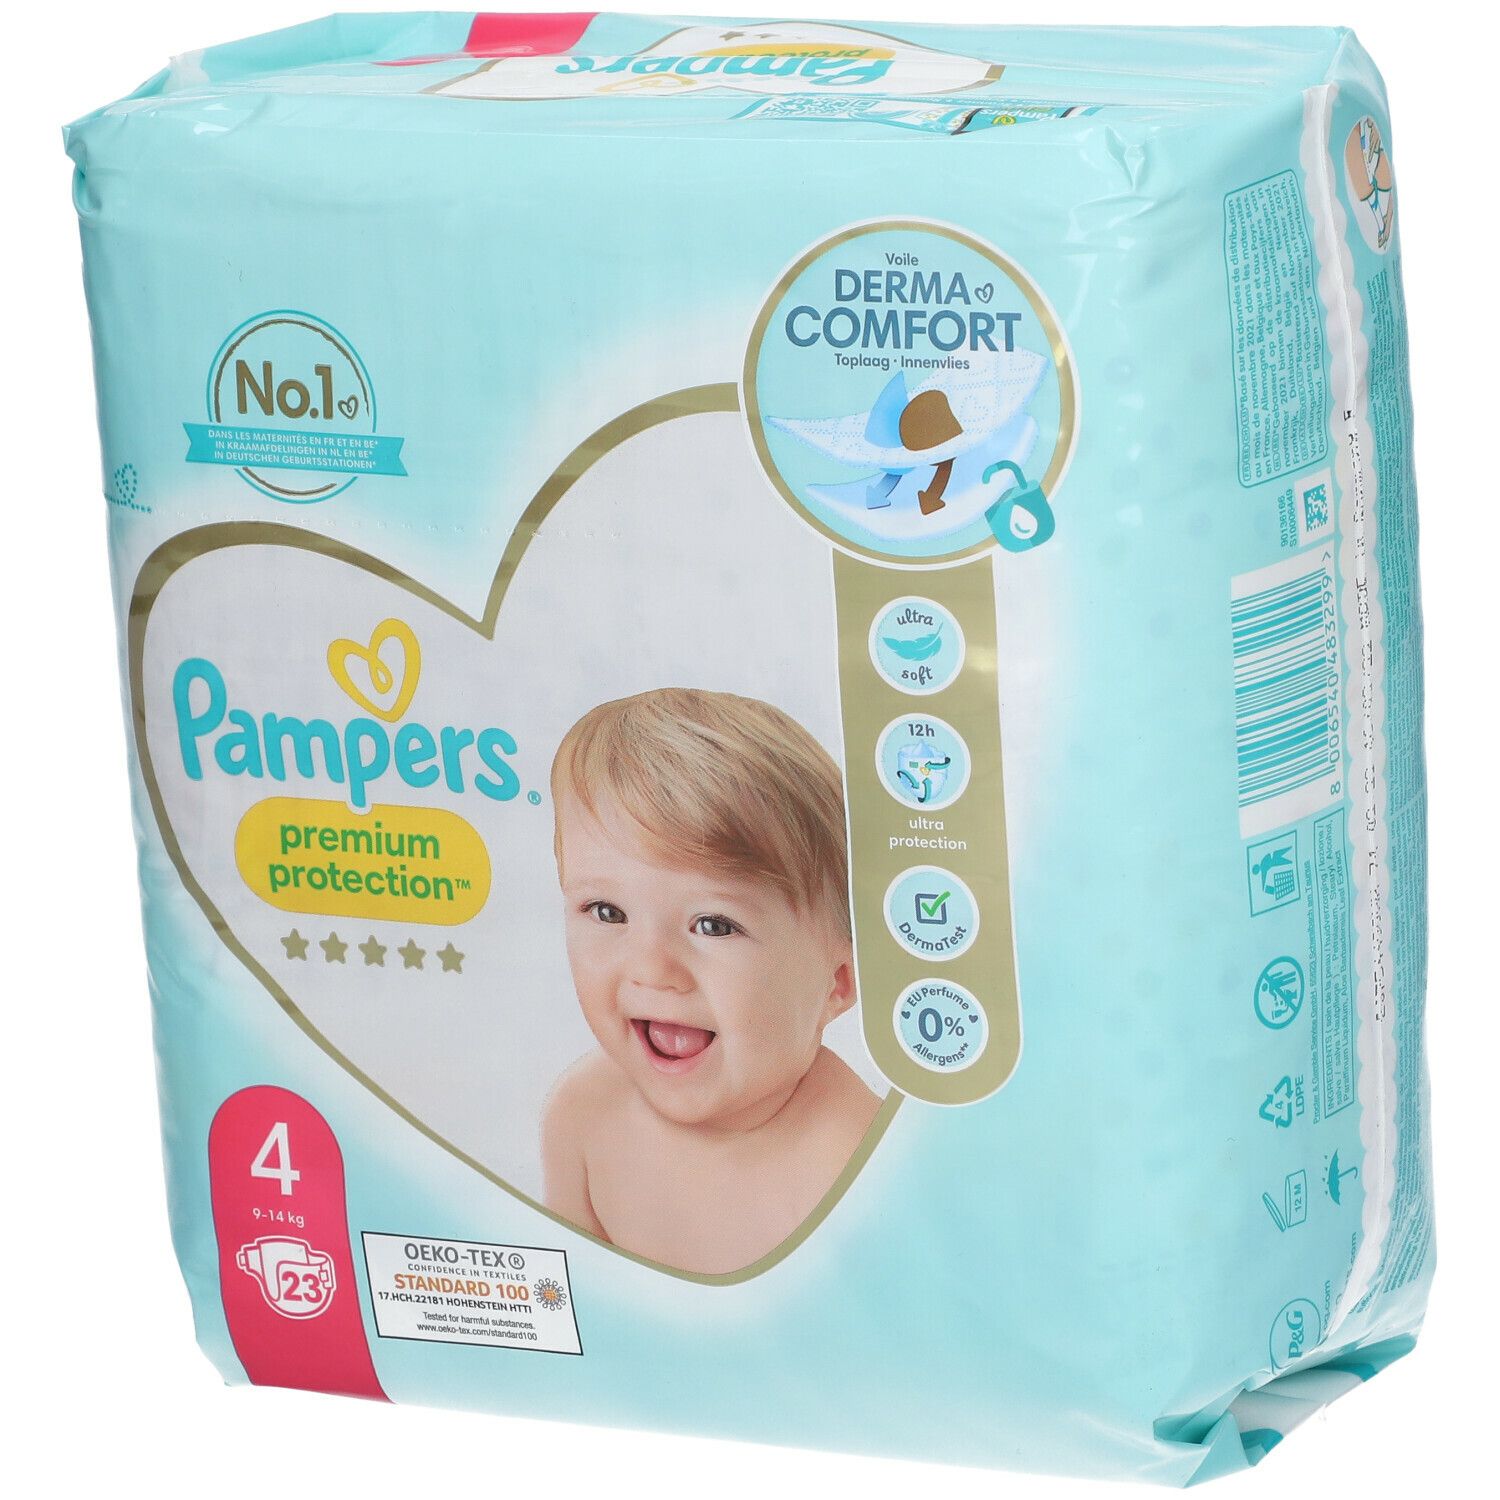 Pampers® Premium Protection™ Couche Taille 4, 9-14 kg